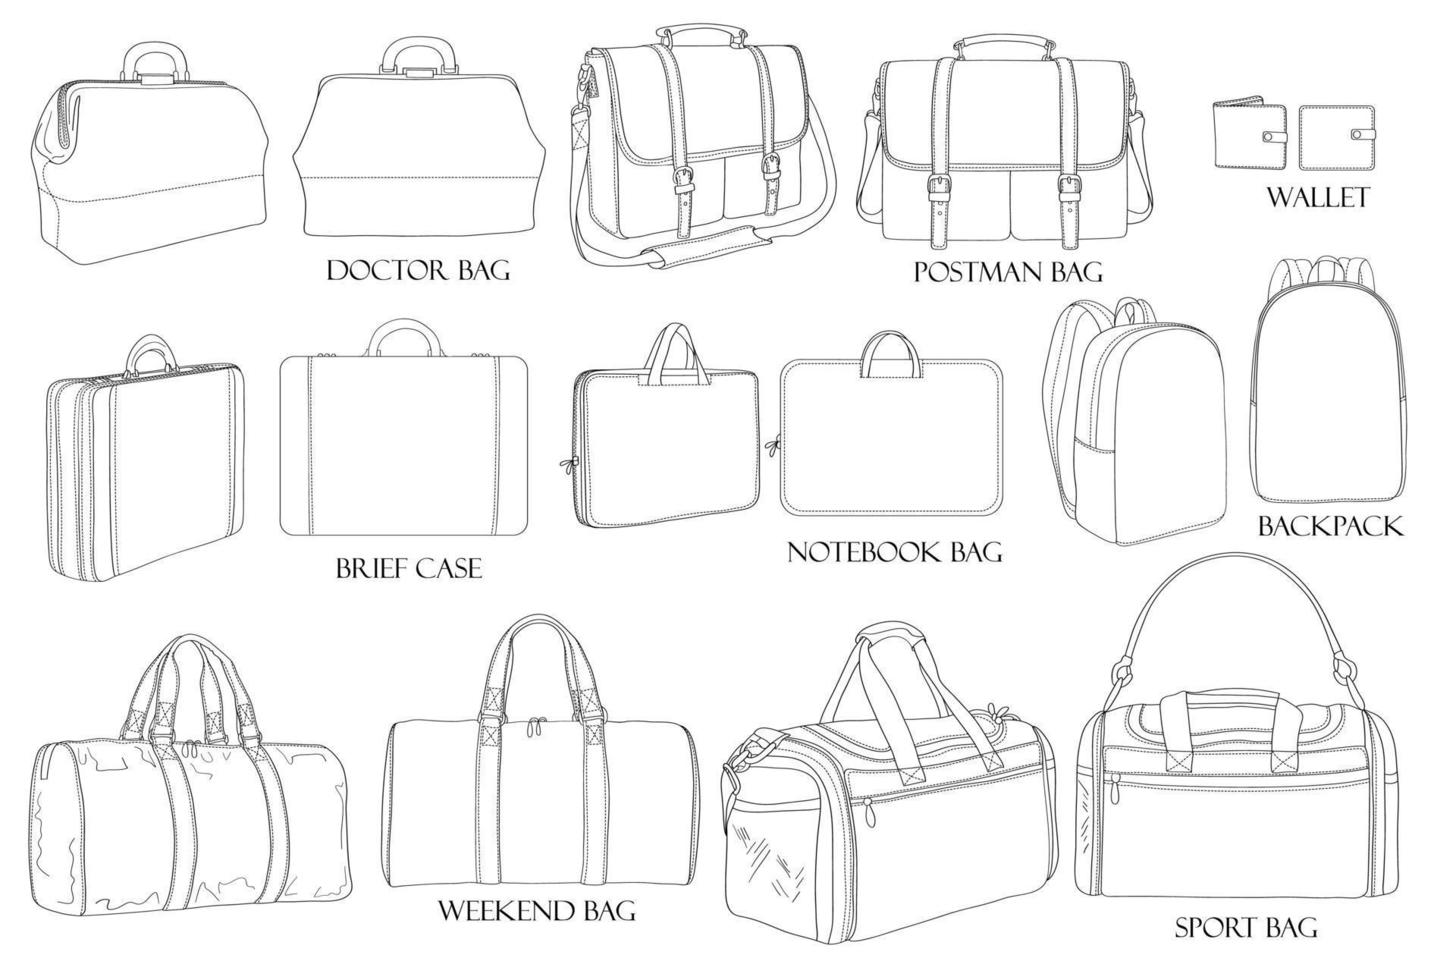 Types of bags. Set illustration of stylish bags. Doctor bag, postman bag, backpack, weekend, wallet, brief case, sport bag, notebook bag. Collection of luxury modern accessories. vector